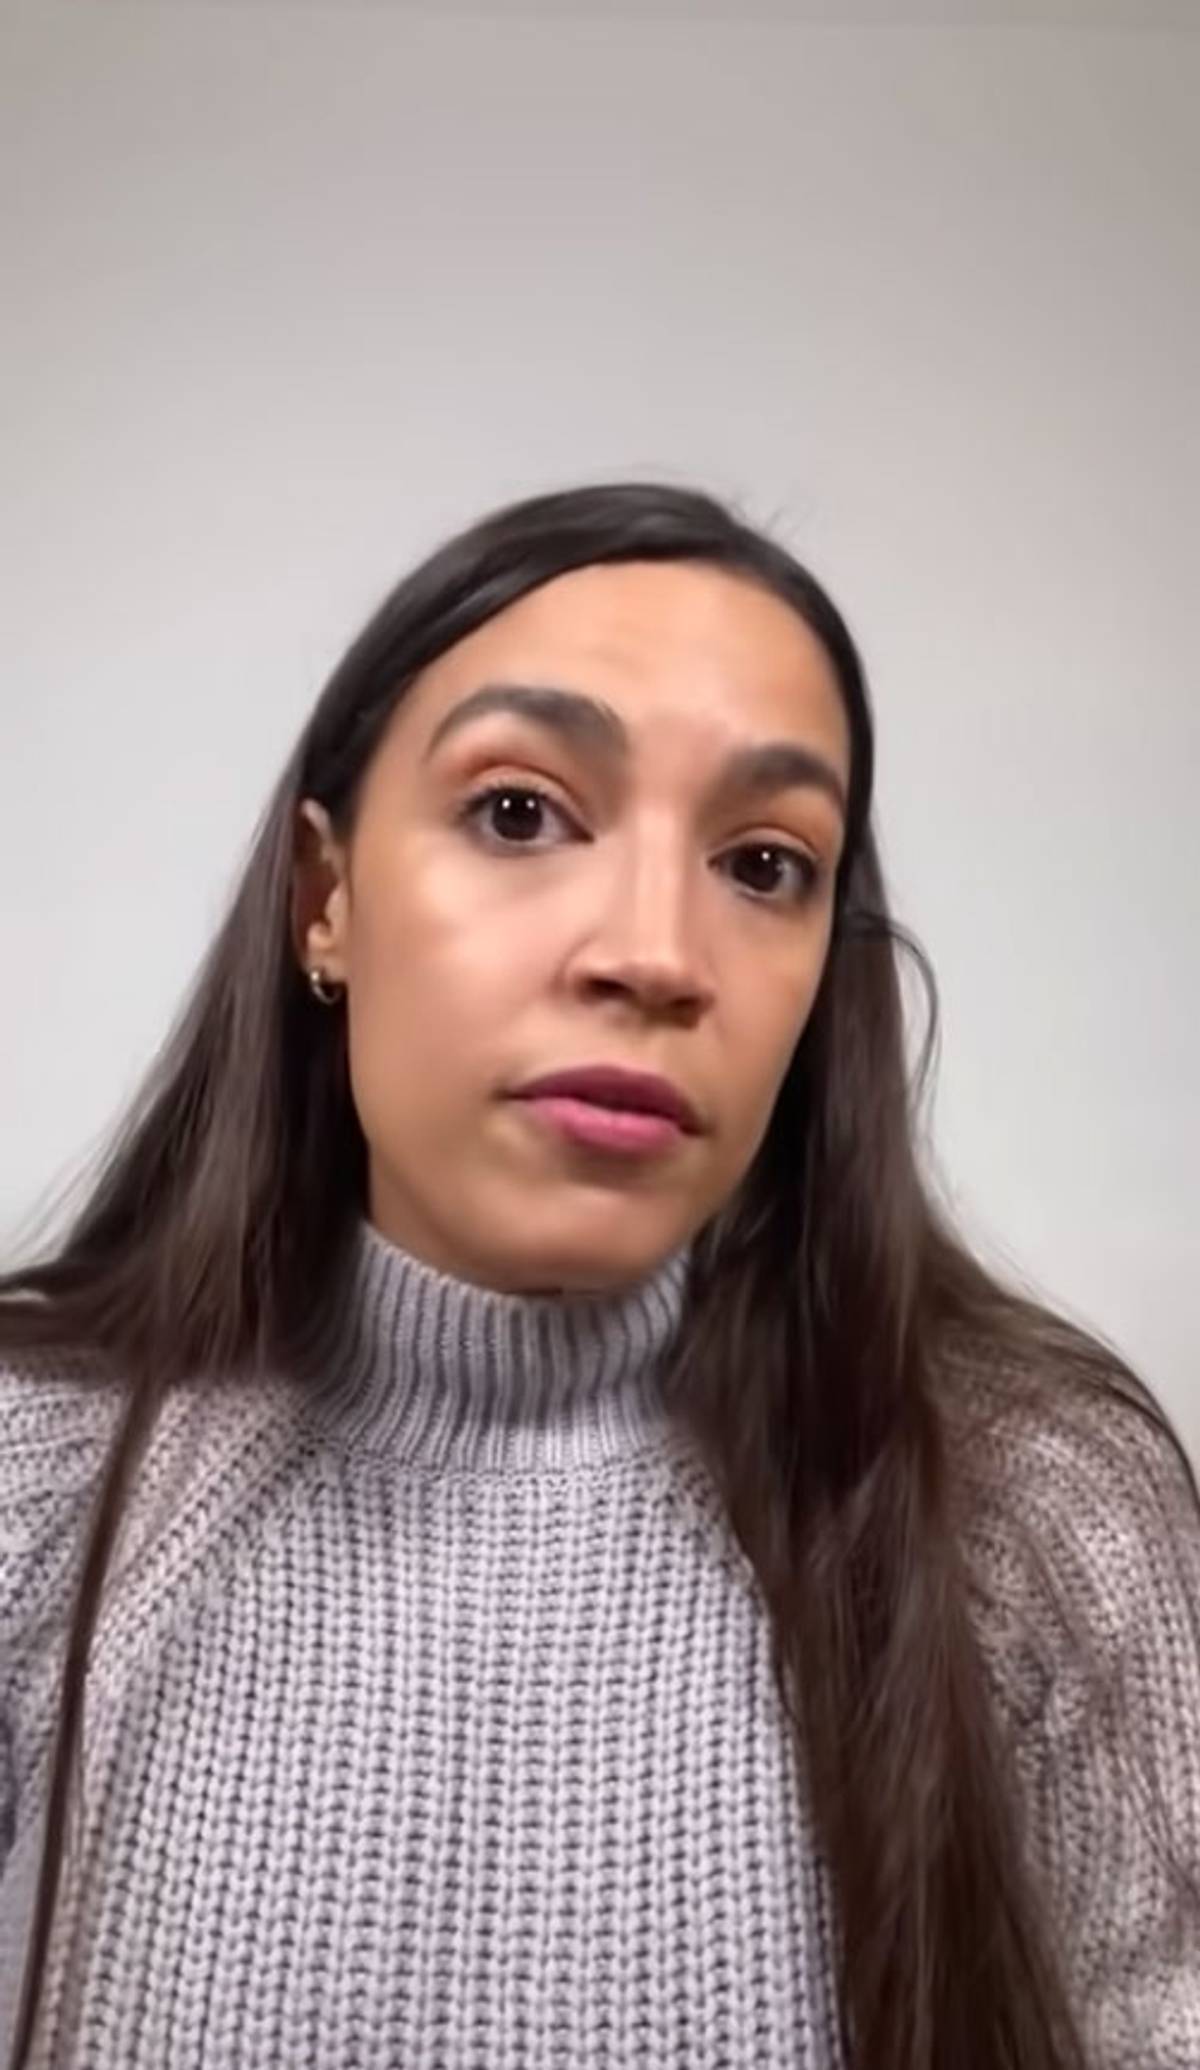 A still from Alexandra Ocasio-Cortez’s video recounting the events of Jan. 6, 2021